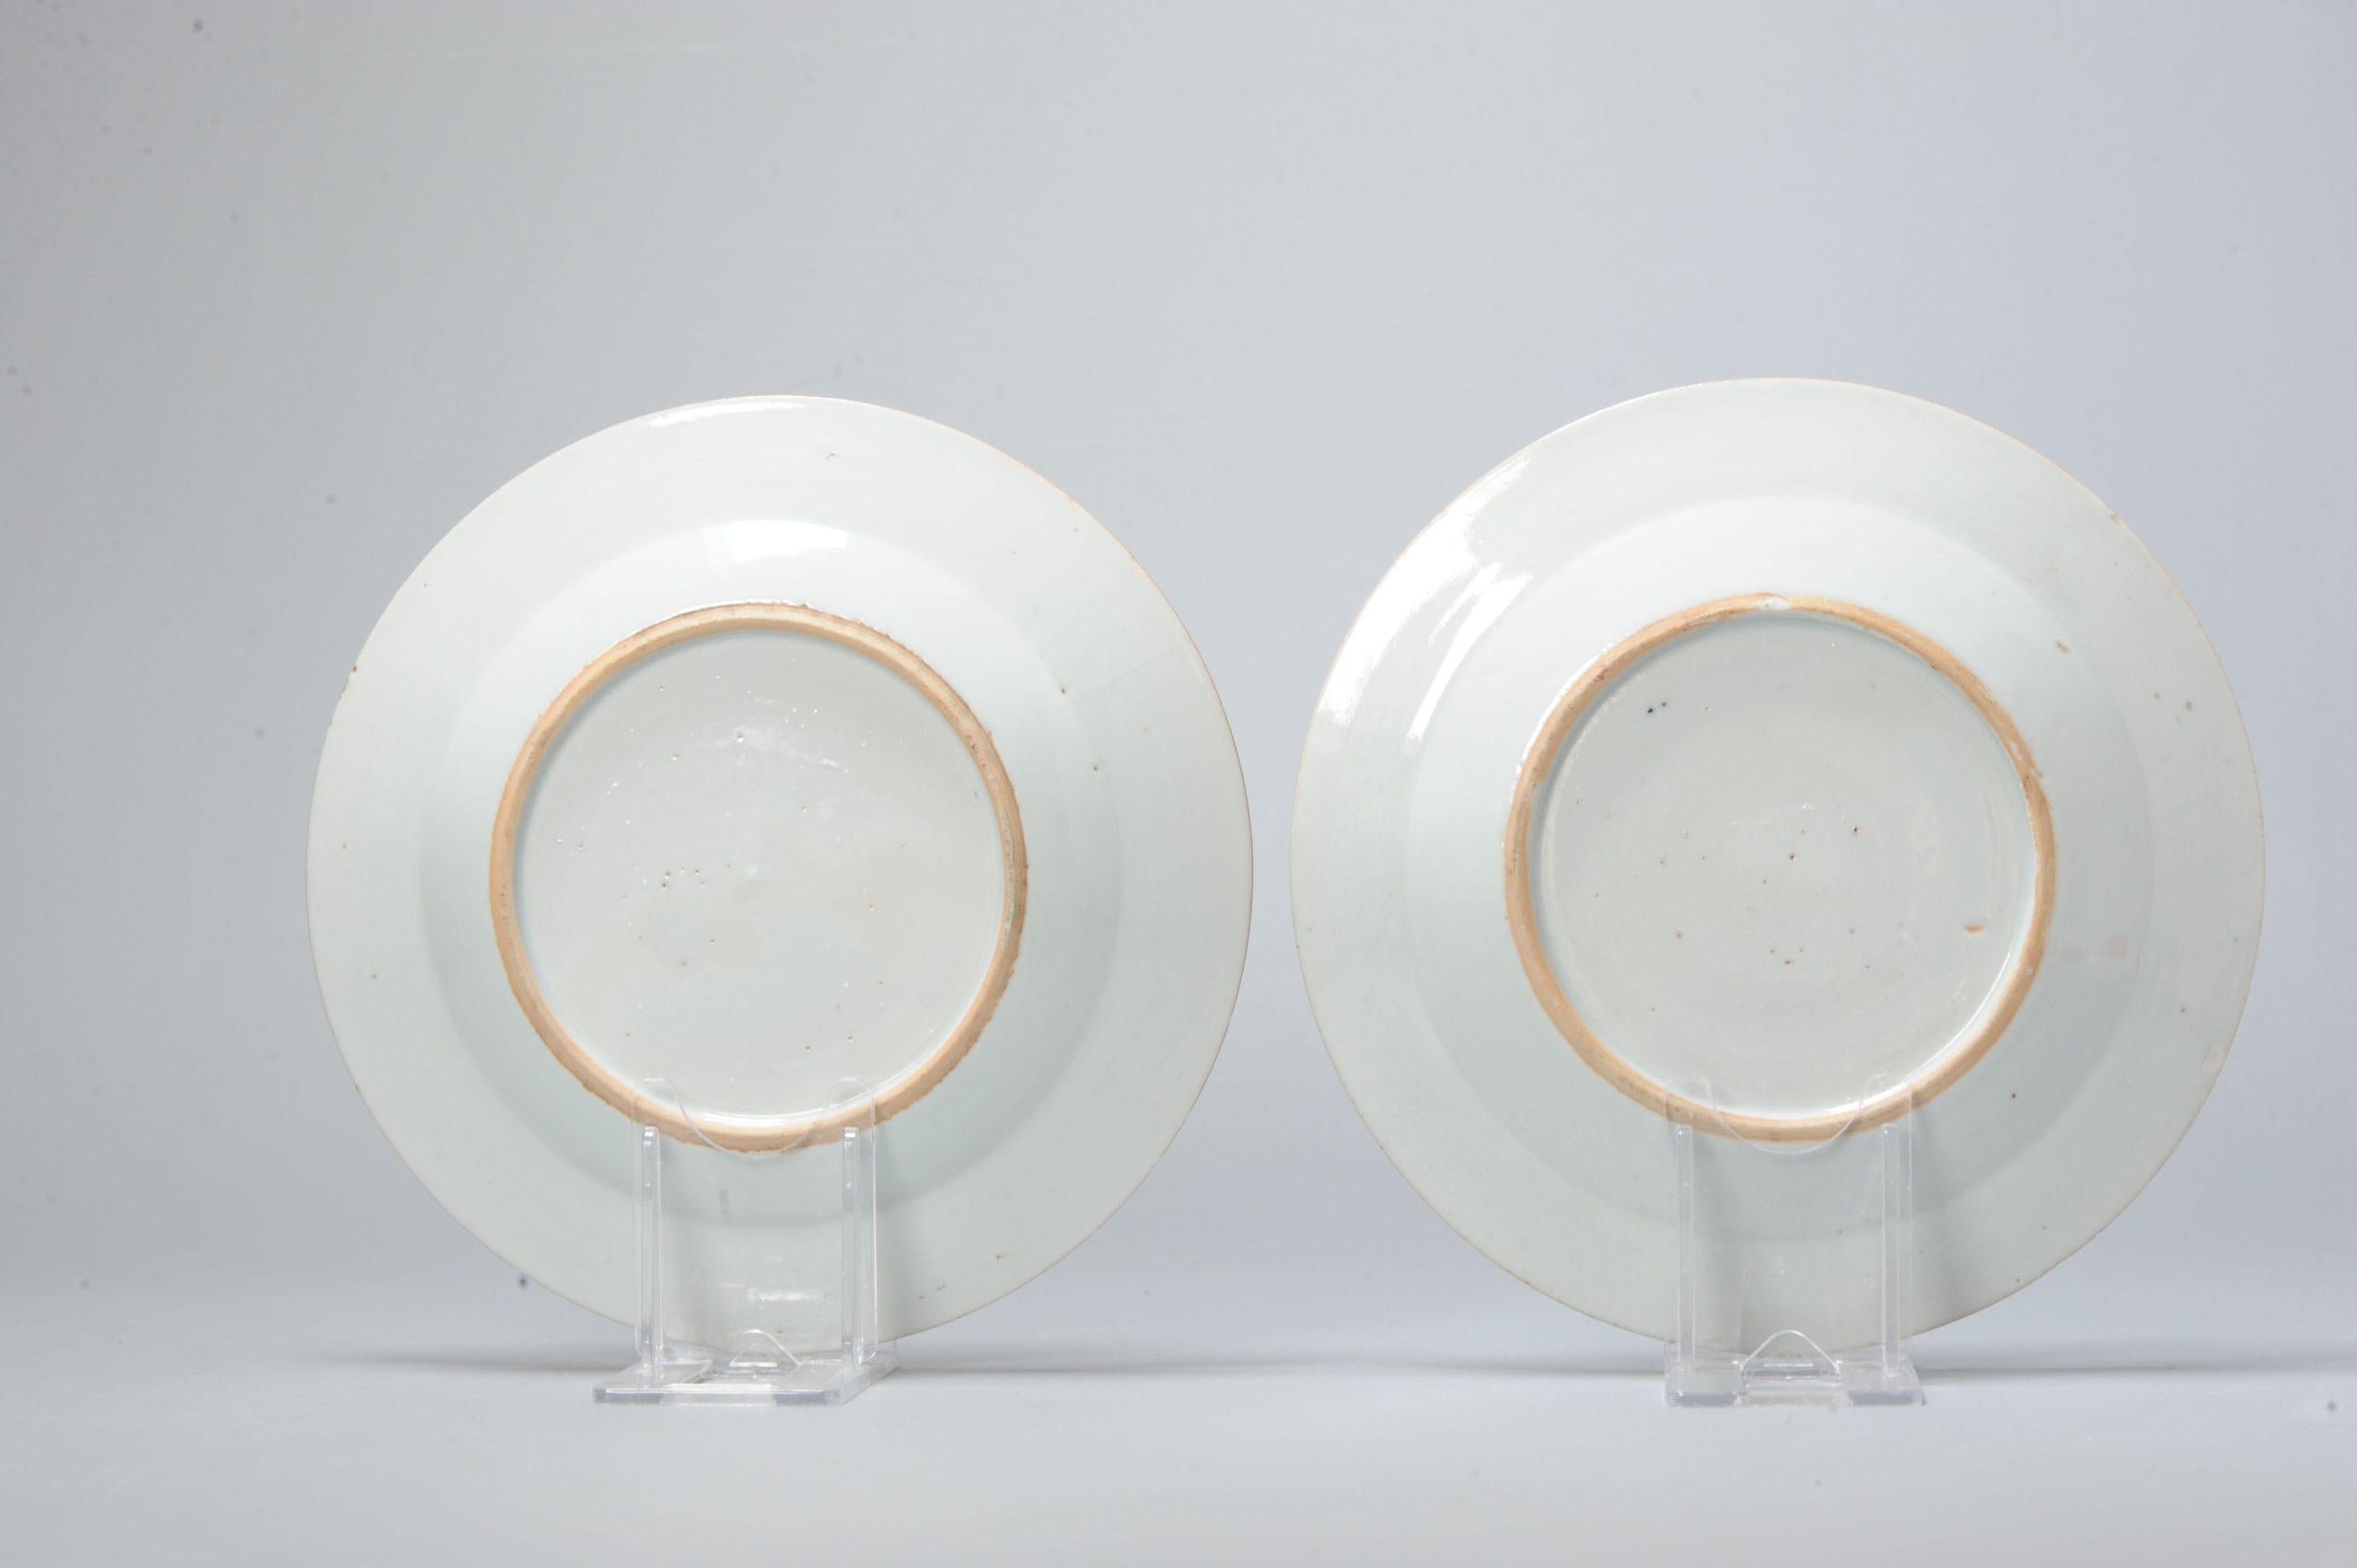 Pair of Antique Chinese Porcelain Desert Plate Dish Amsterdam Bont, 18th Century For Sale 1